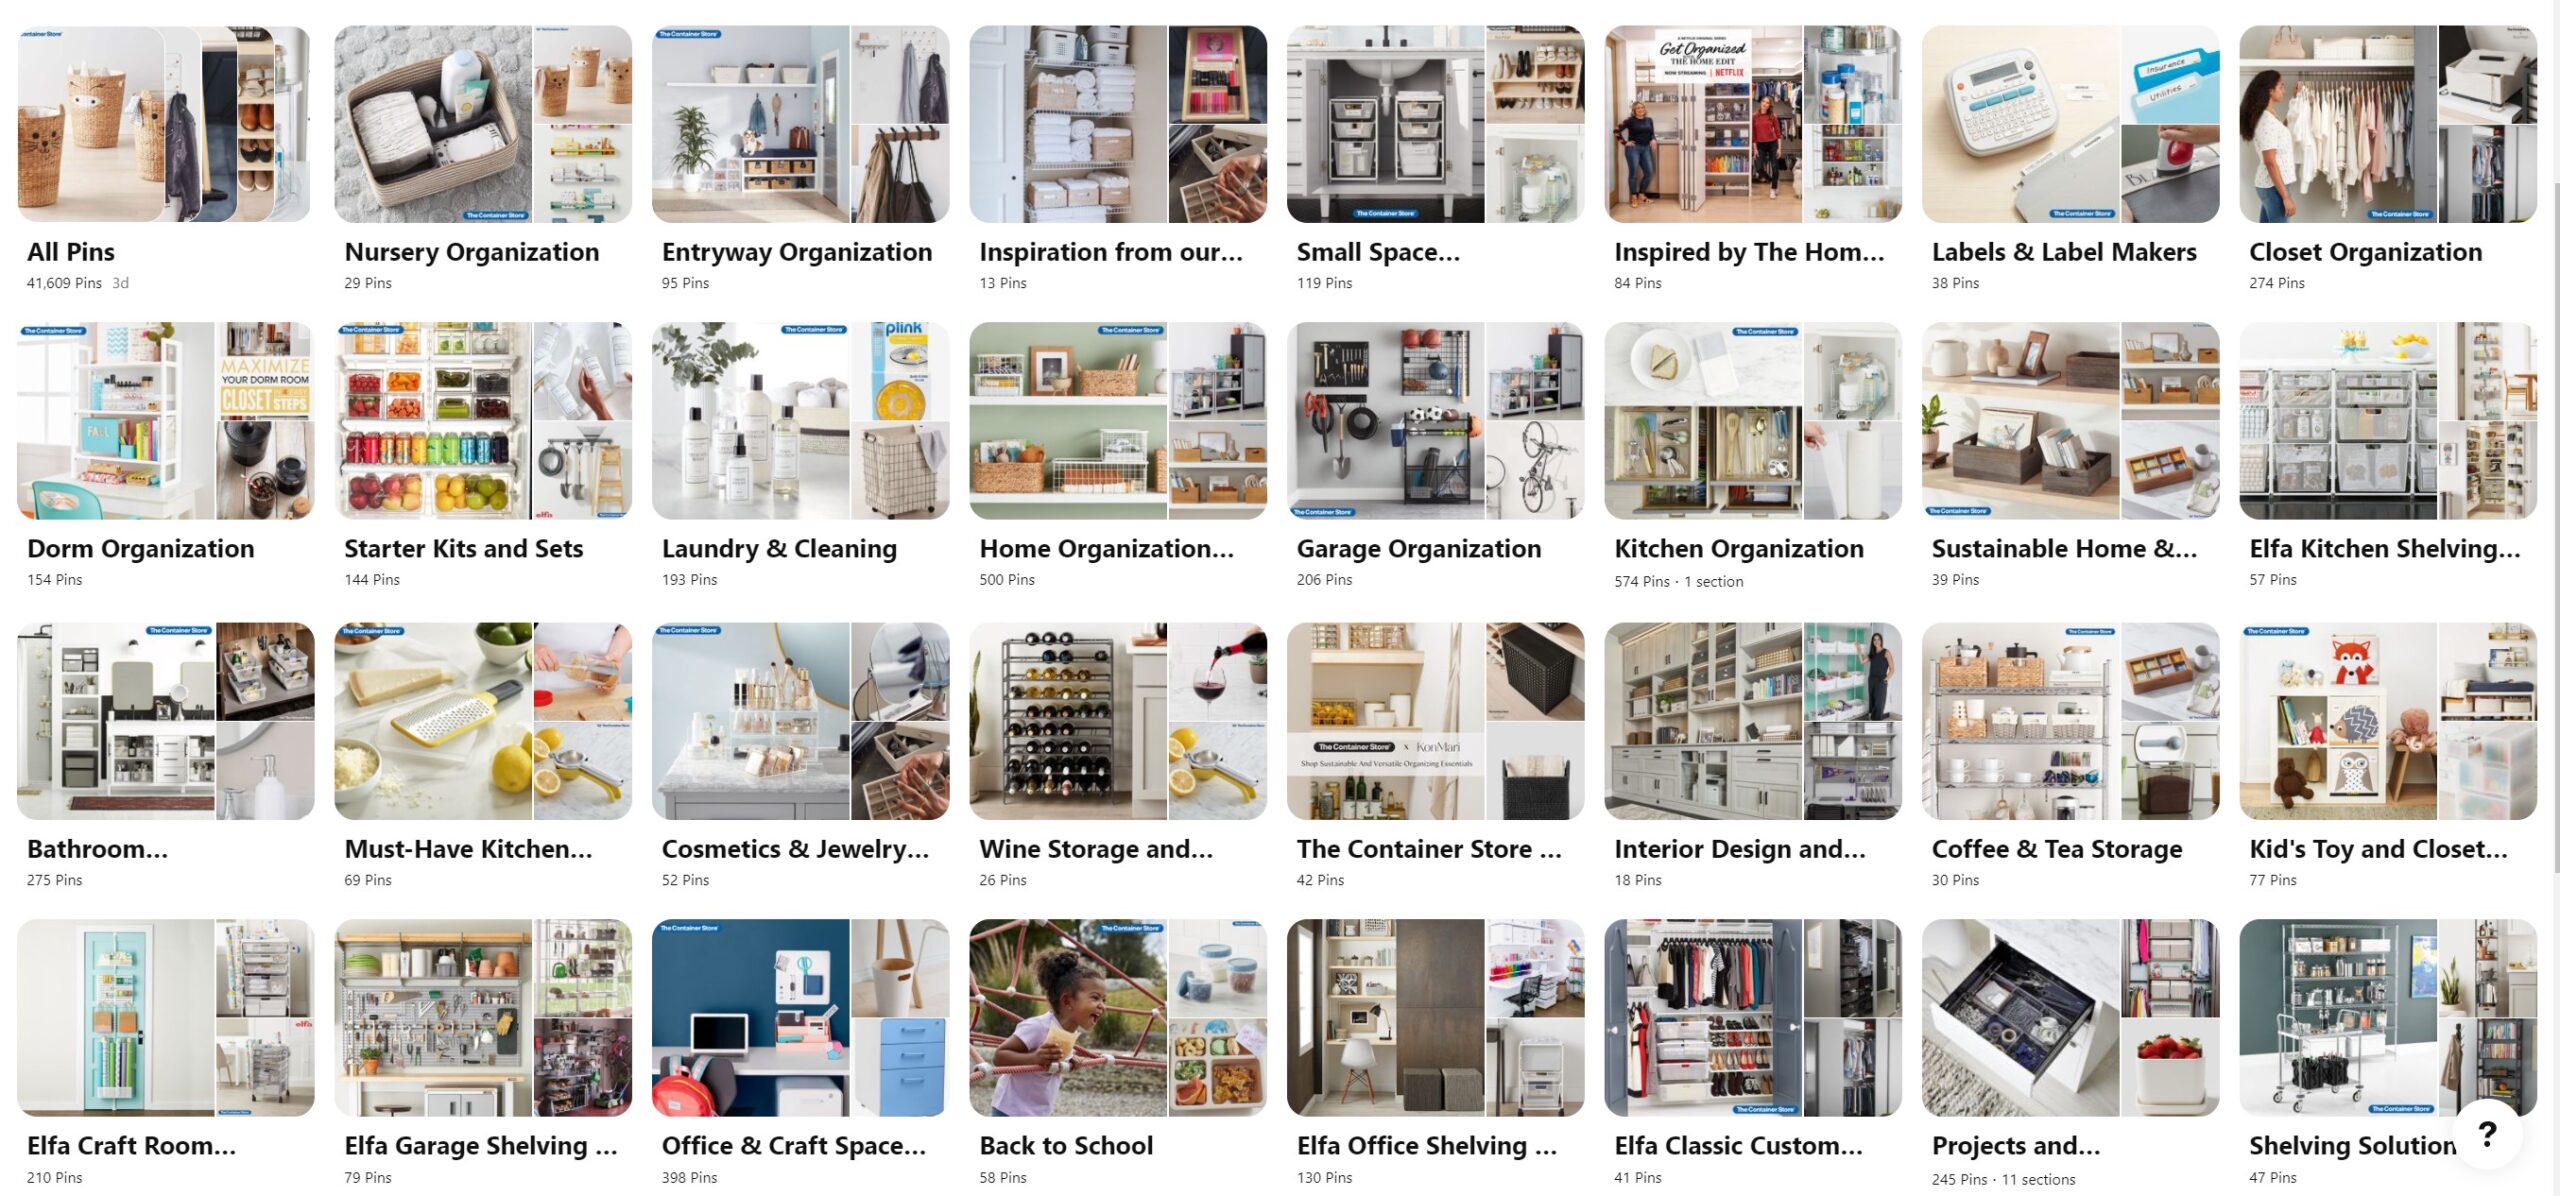 The Container Store Pinterest Boards